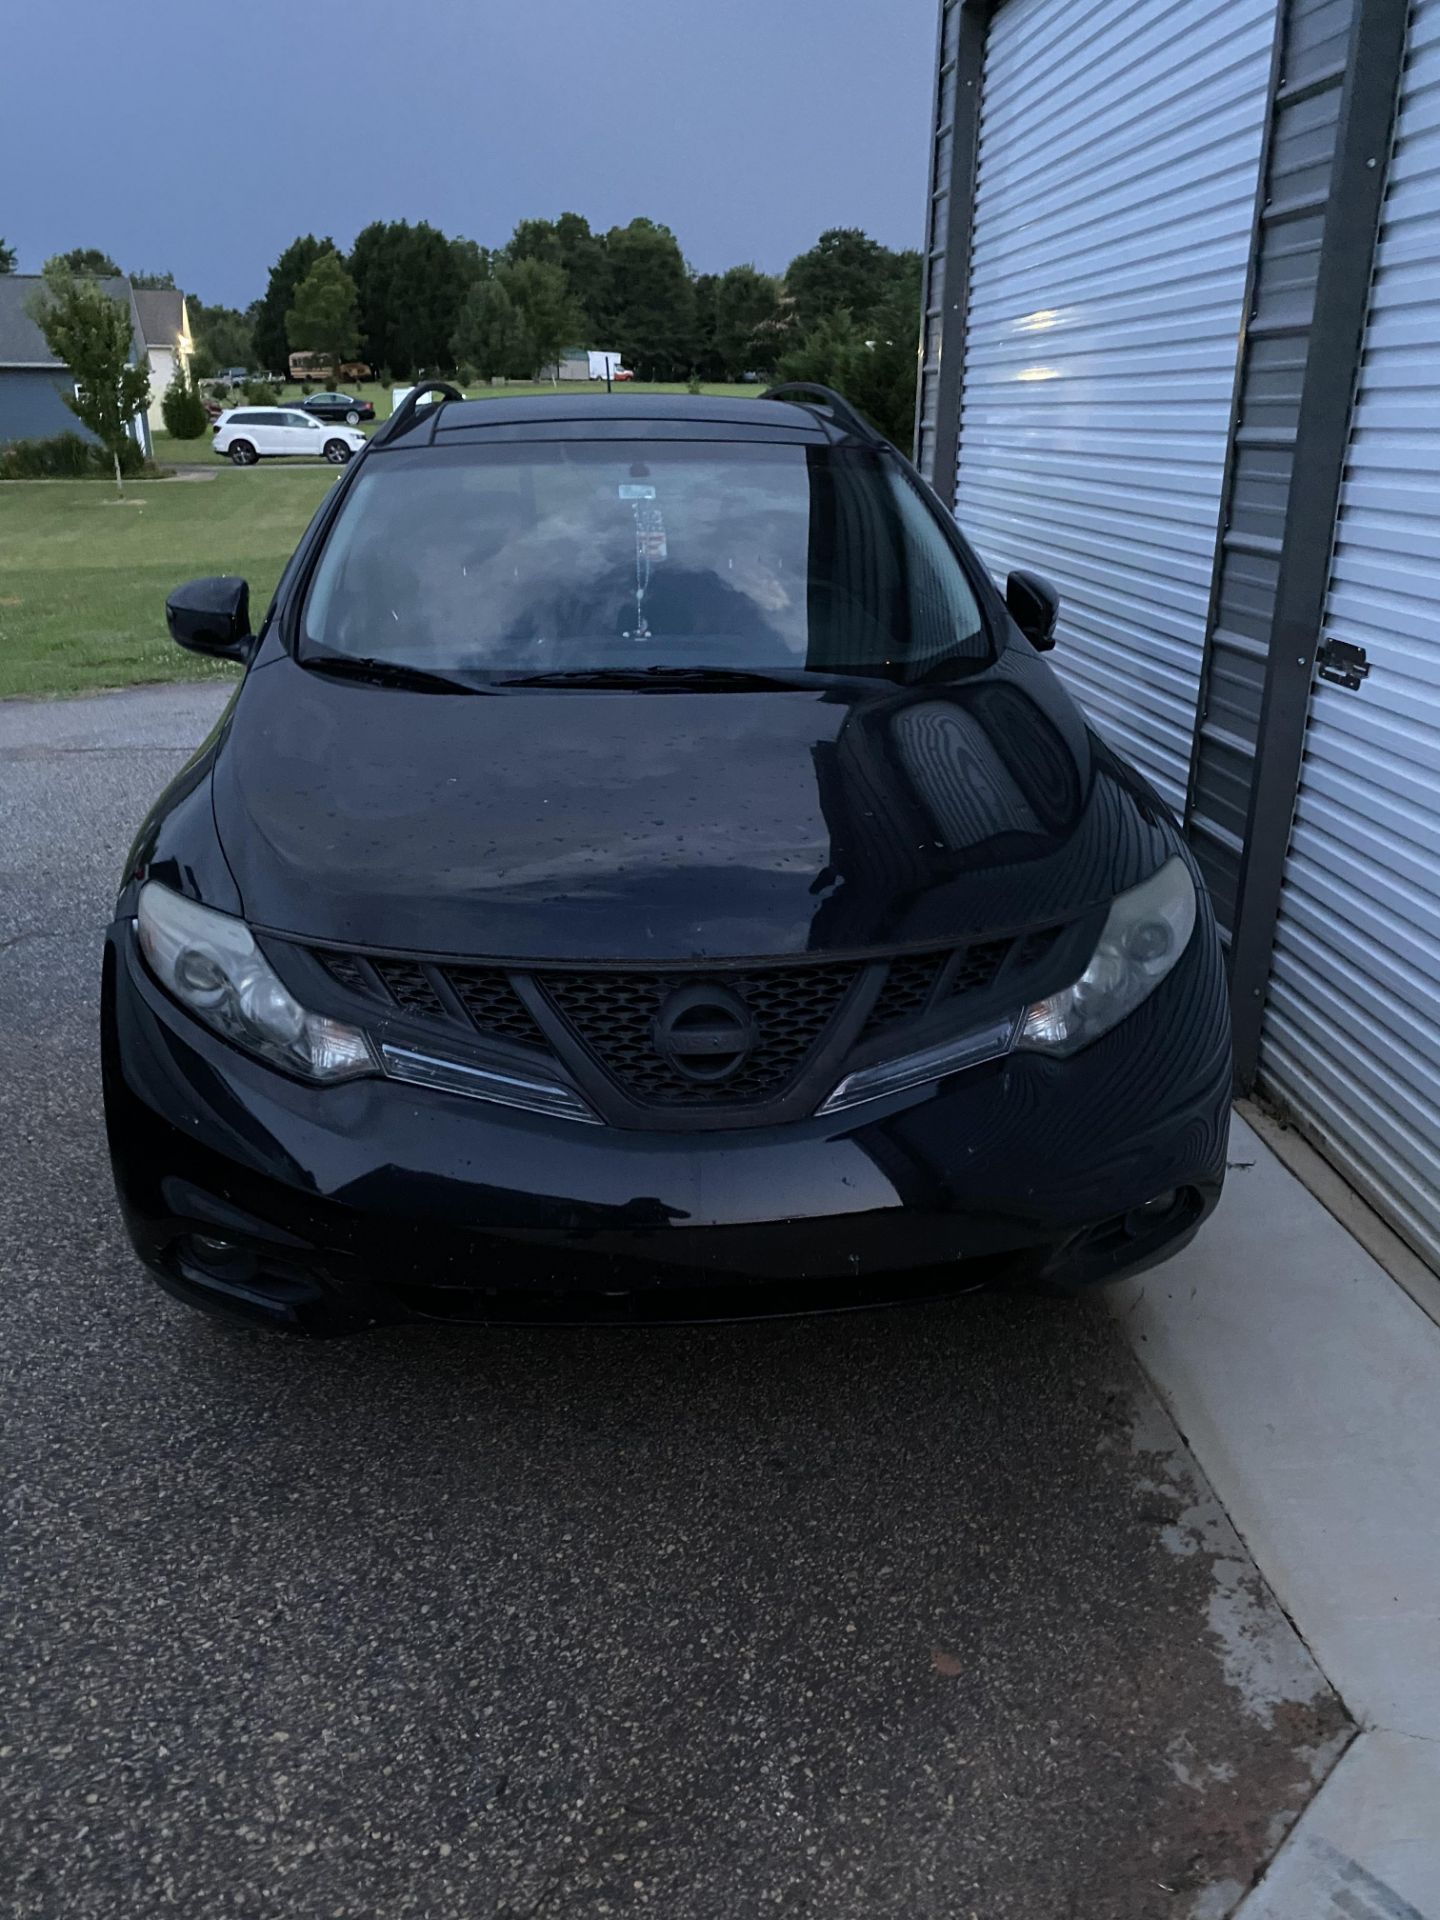 2012 NISSAN MURANO - BLACK - BLACK LEATHER - 77,144 MILES ON ODOMETER - (LOCATED IN INMAN SC) - Image 3 of 13